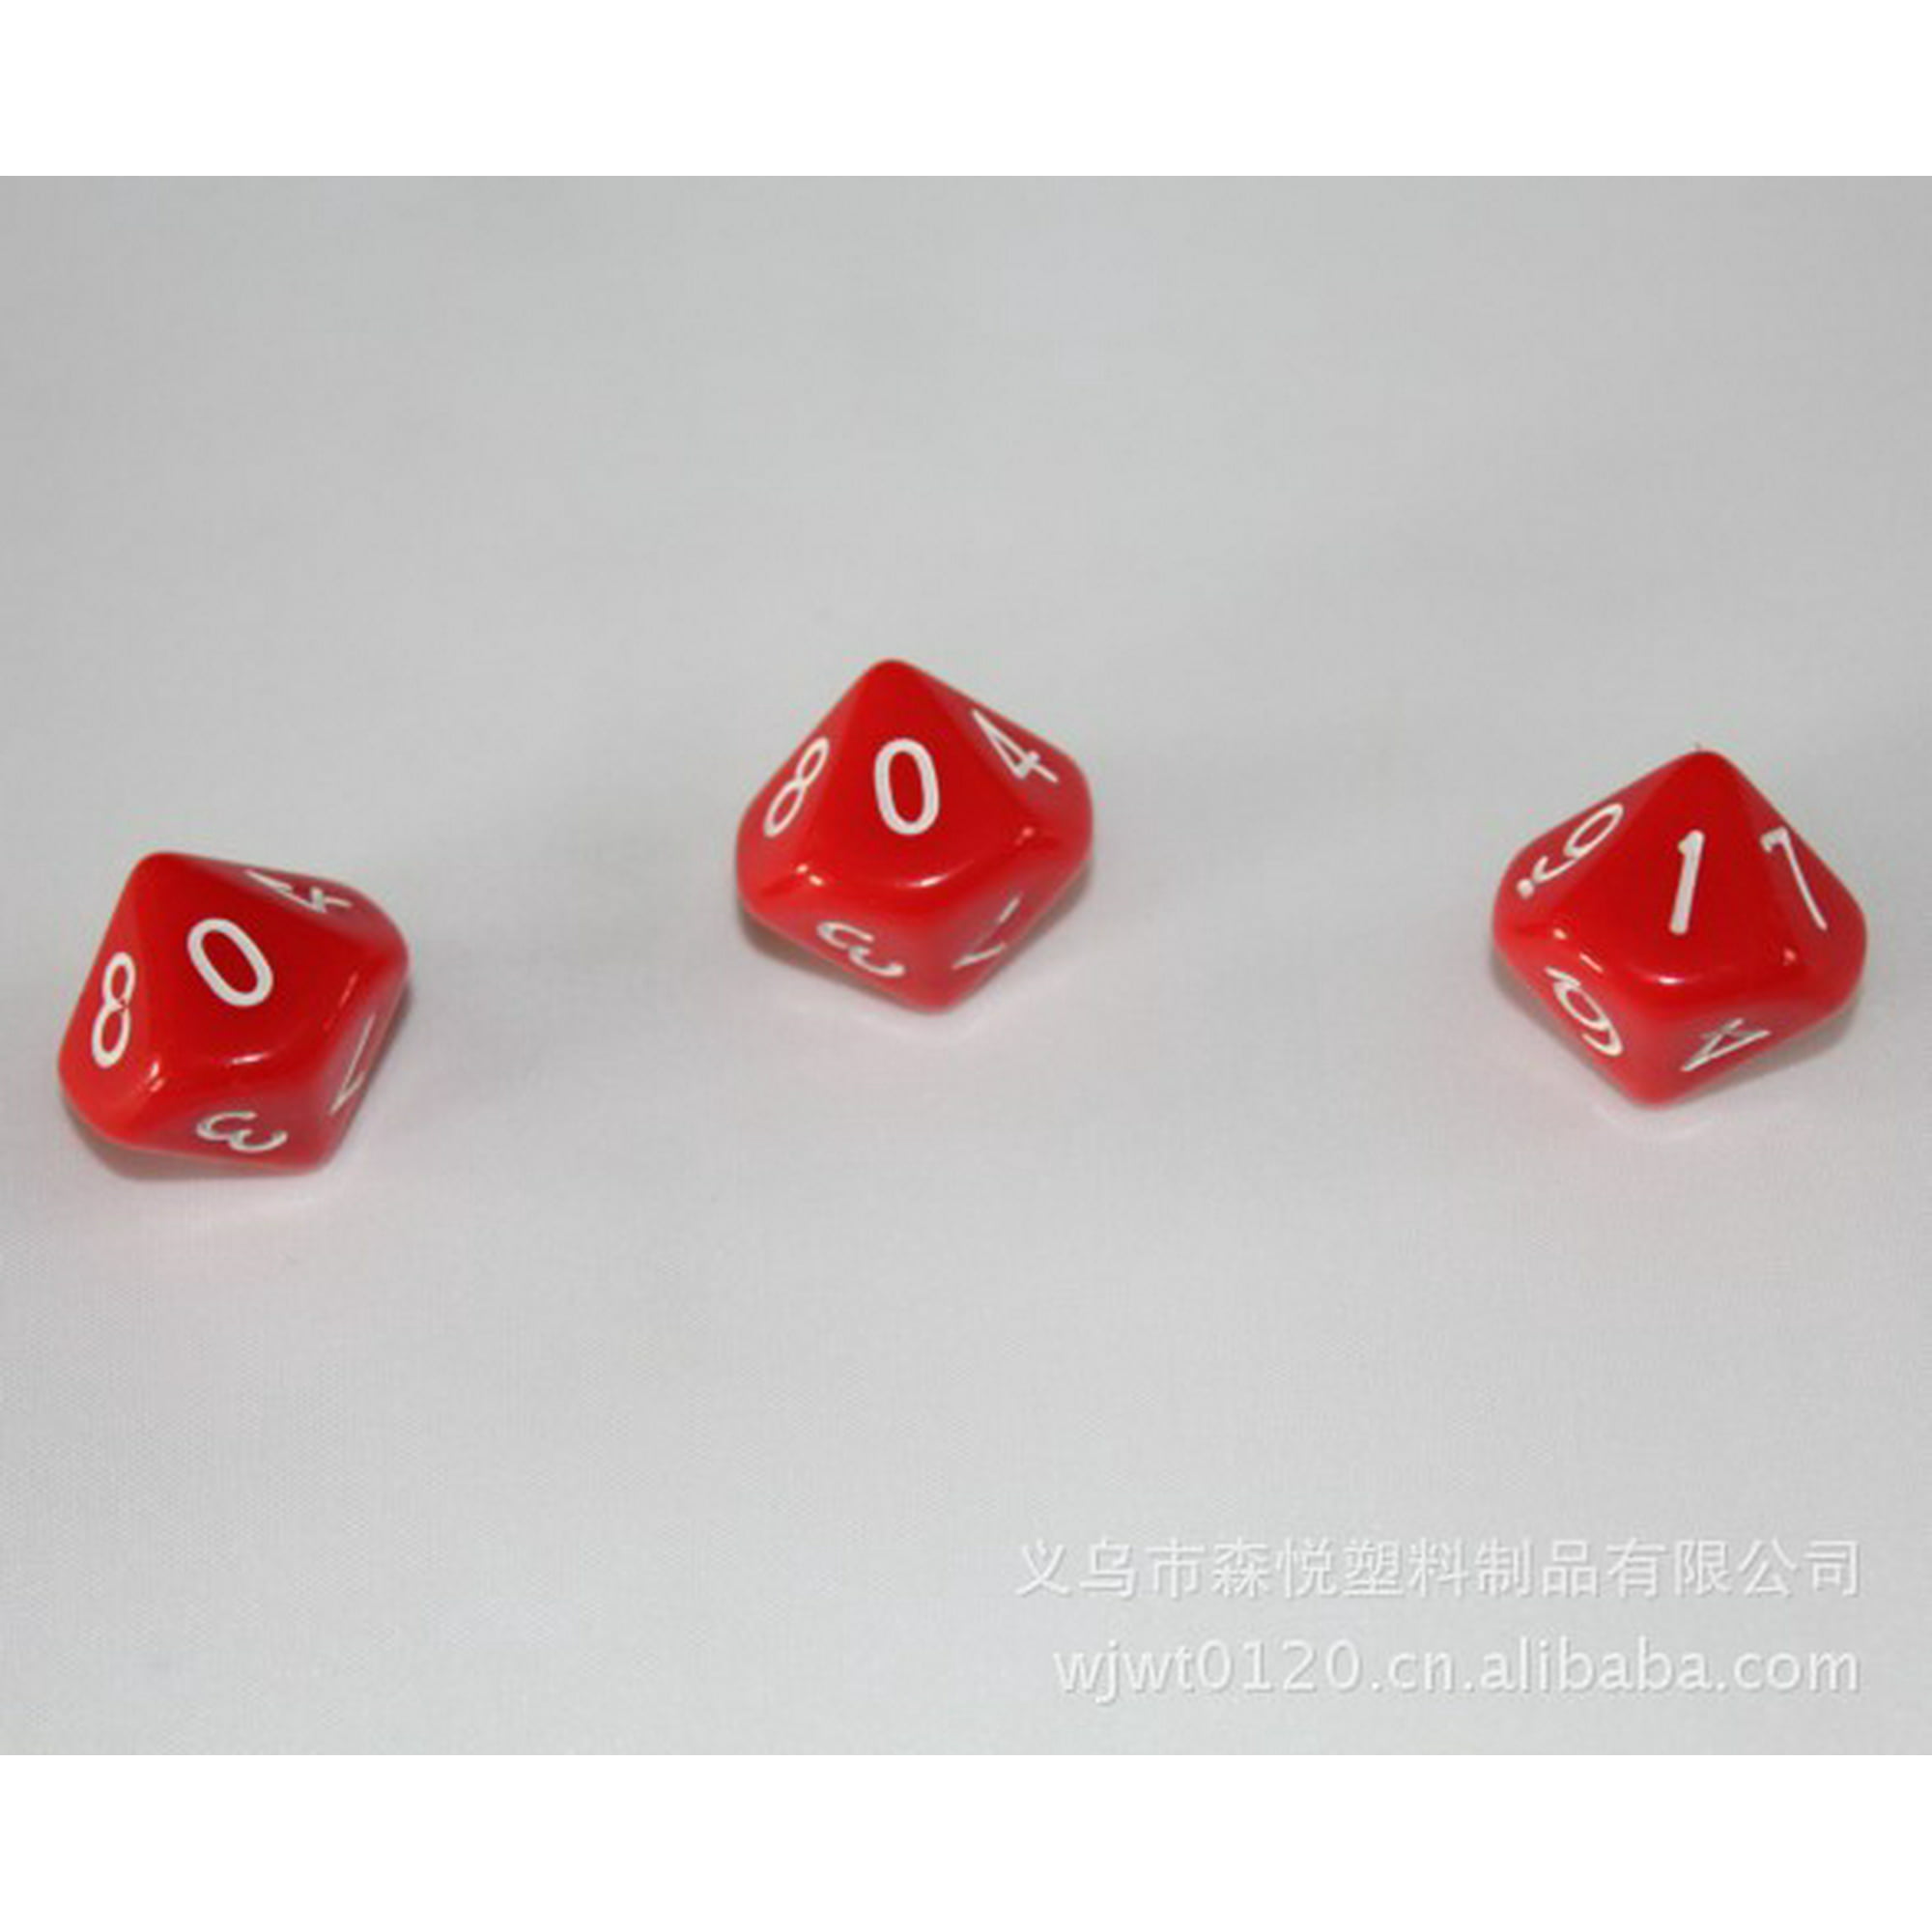 10pcs Cubes Board Game Props 10-side 0-9 Acrylic Number accessory Cubes Table Game Red Walmart Canada